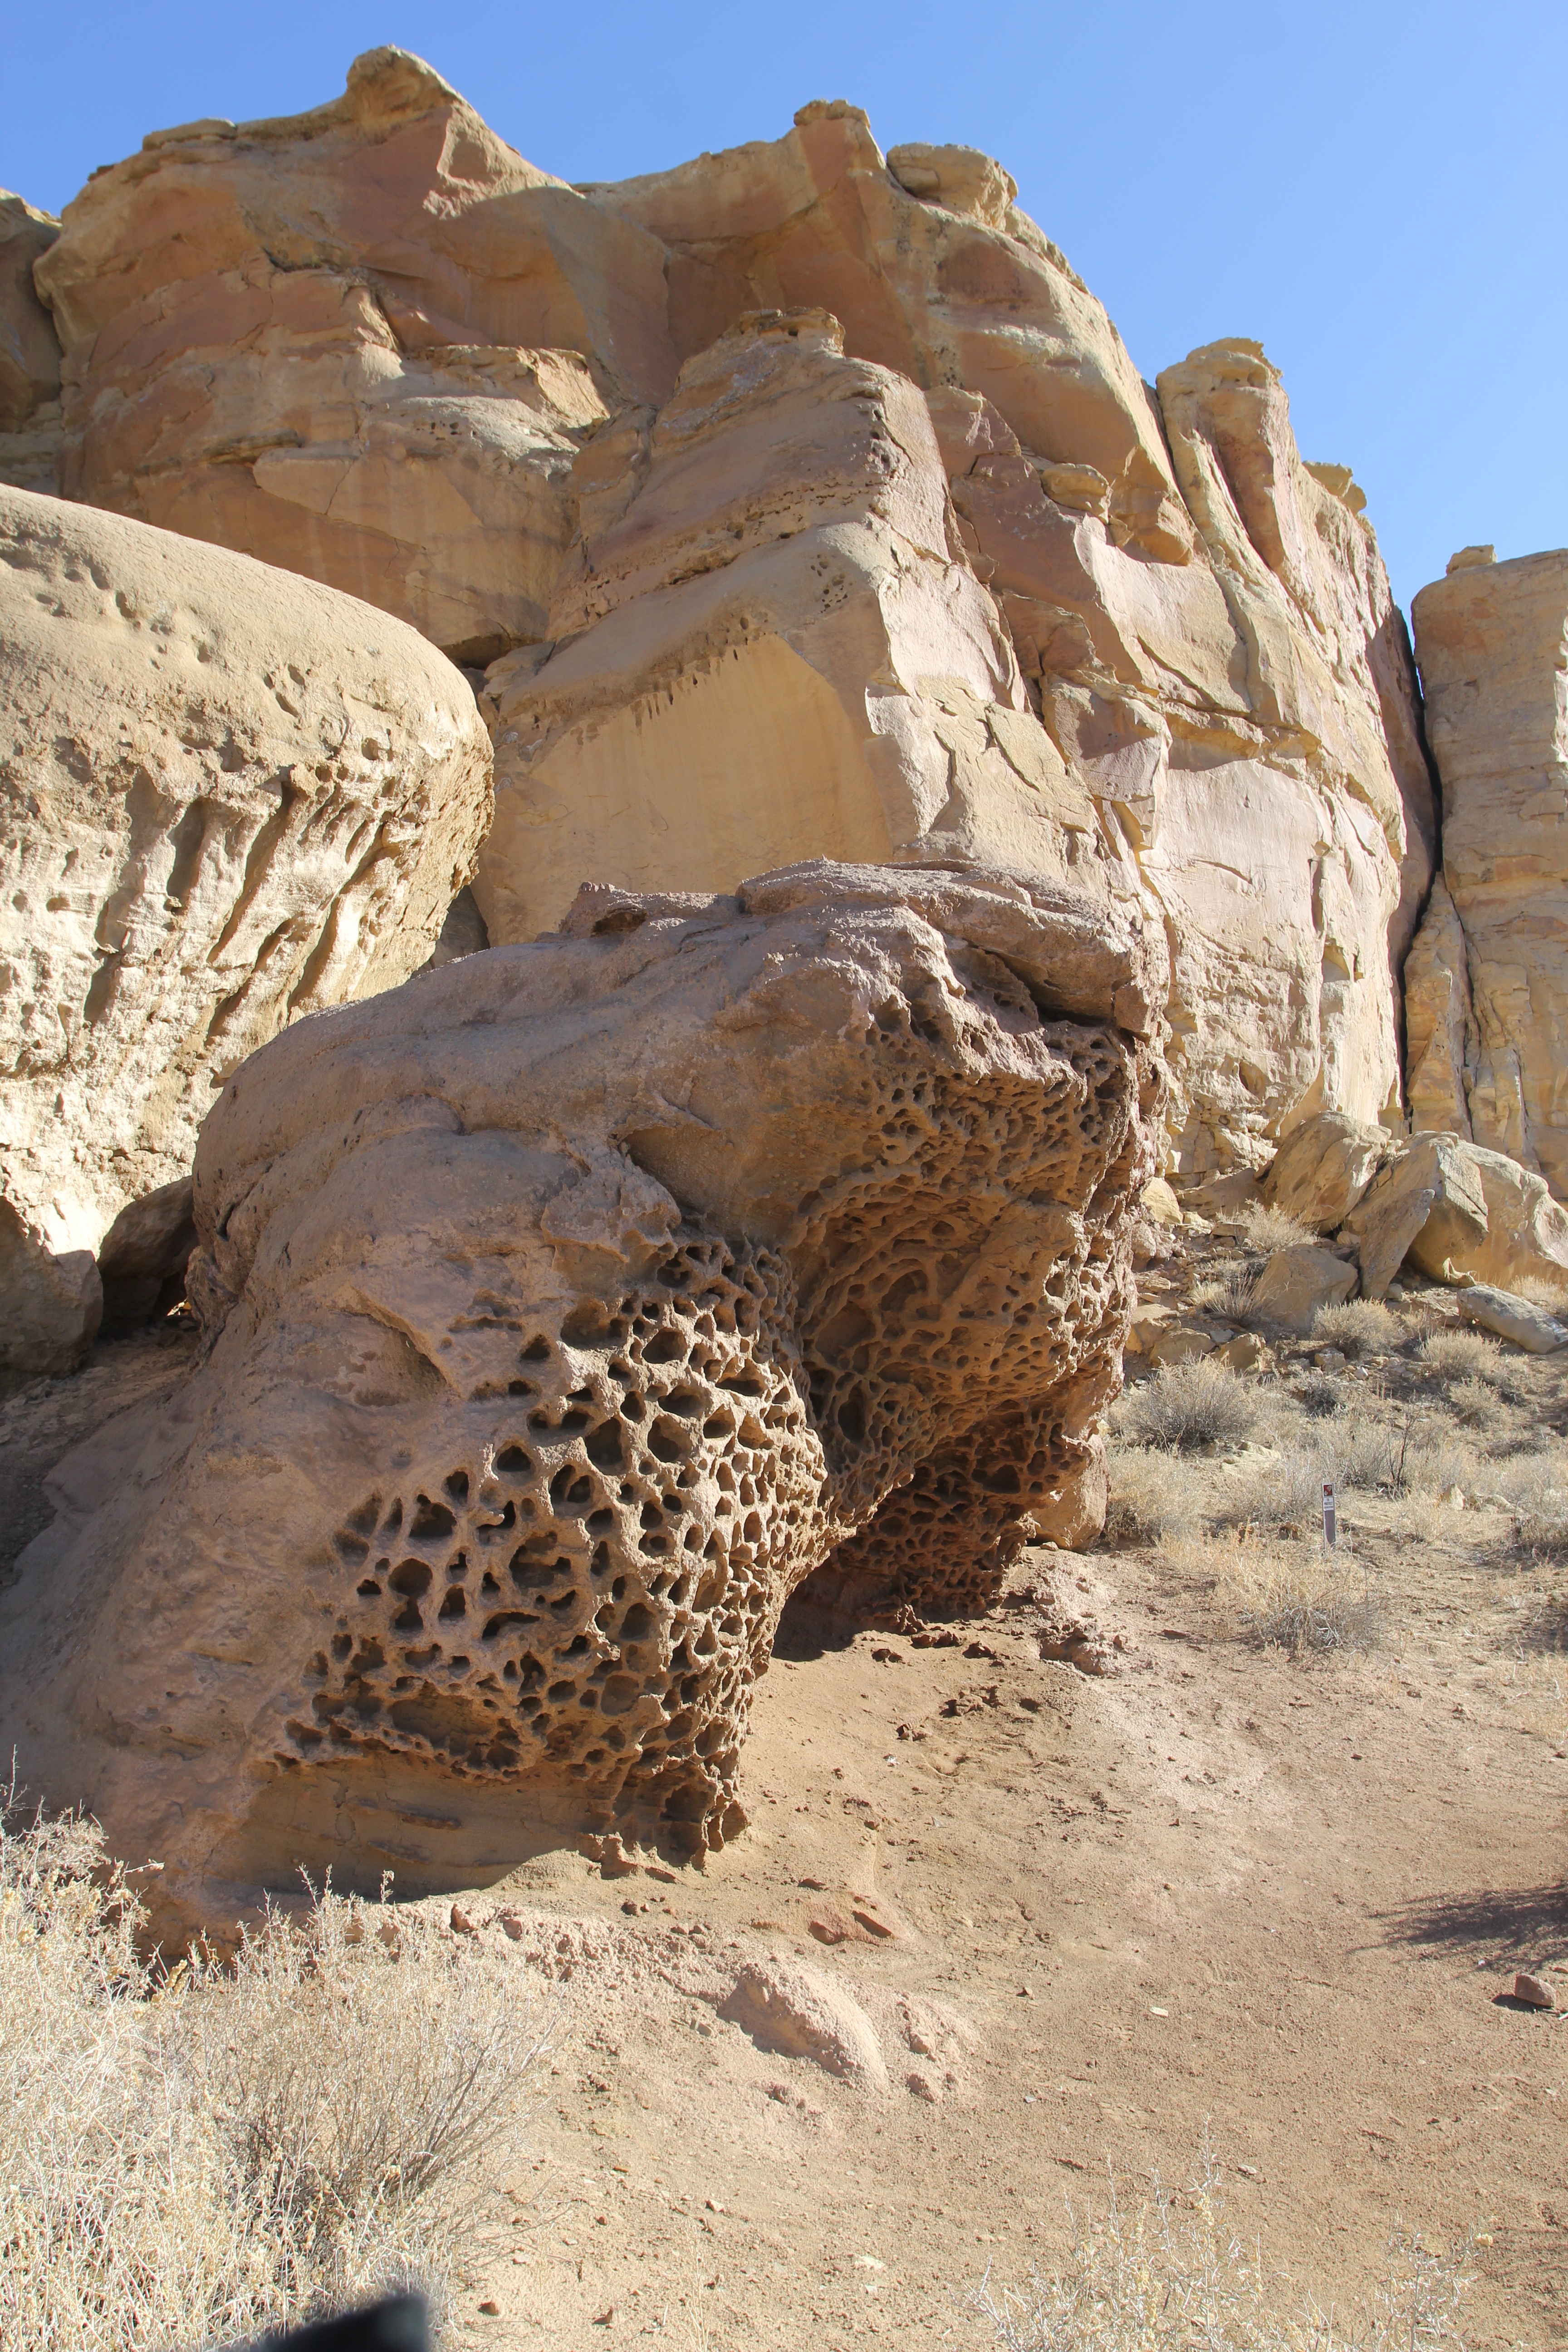 Weathered designs in the sandstone canyon walls from millions of years of erosion in Chaco Canyon